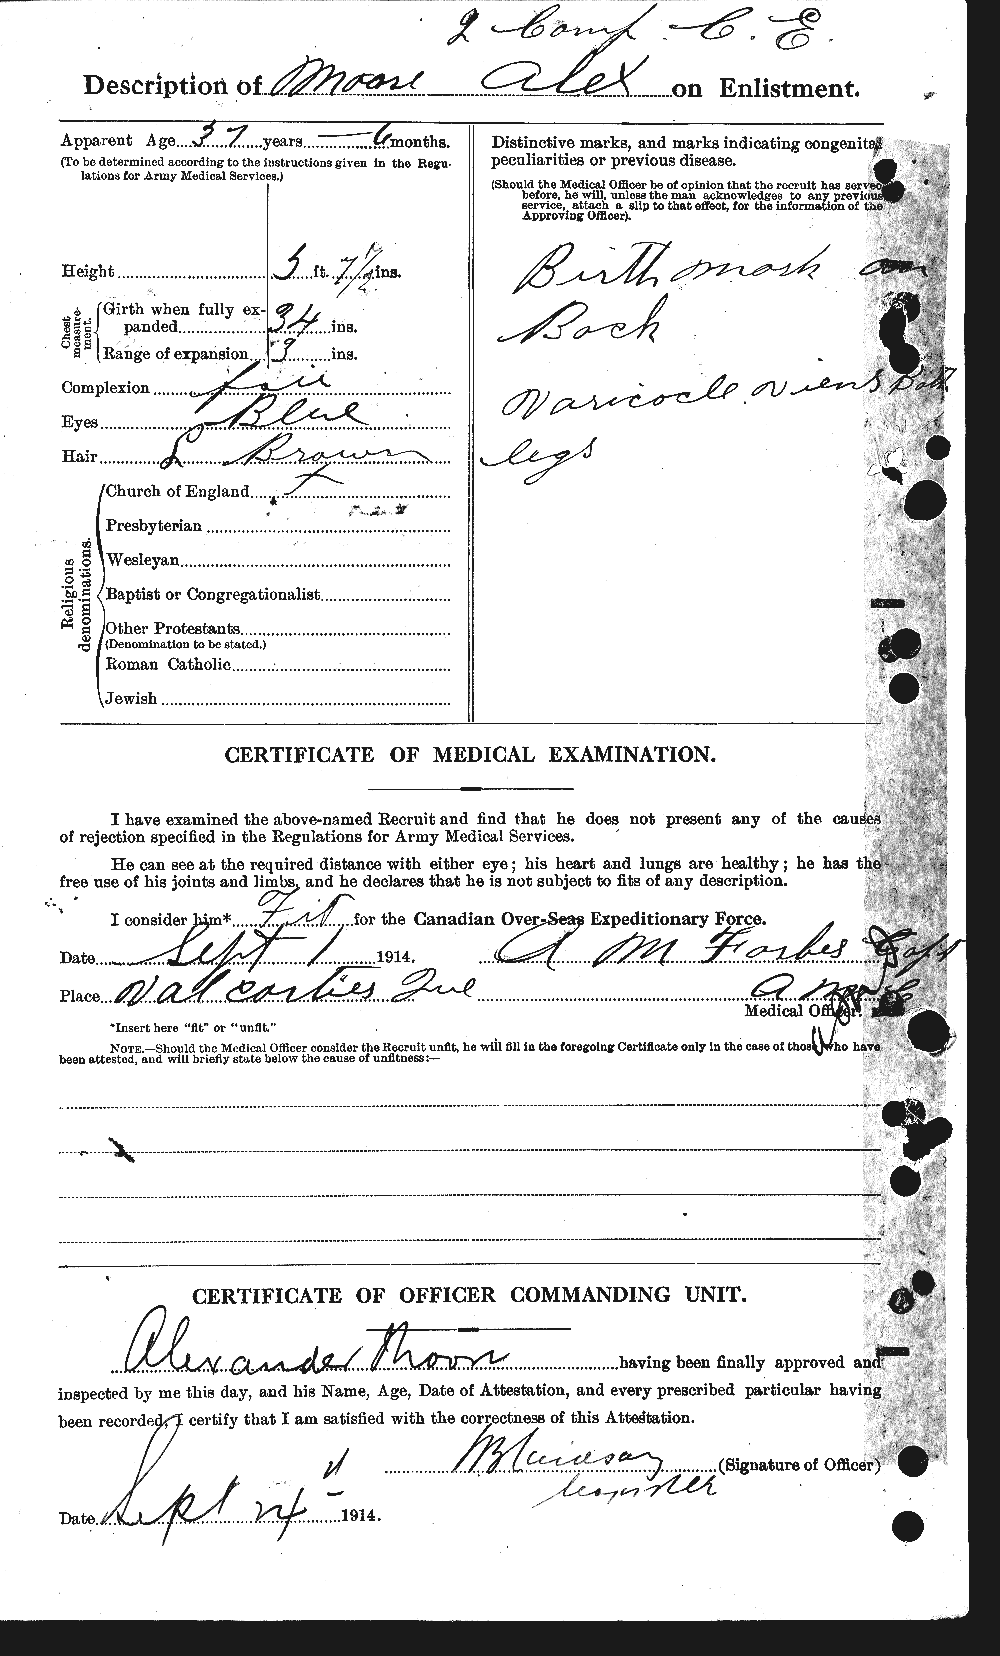 Personnel Records of the First World War - CEF 506361b